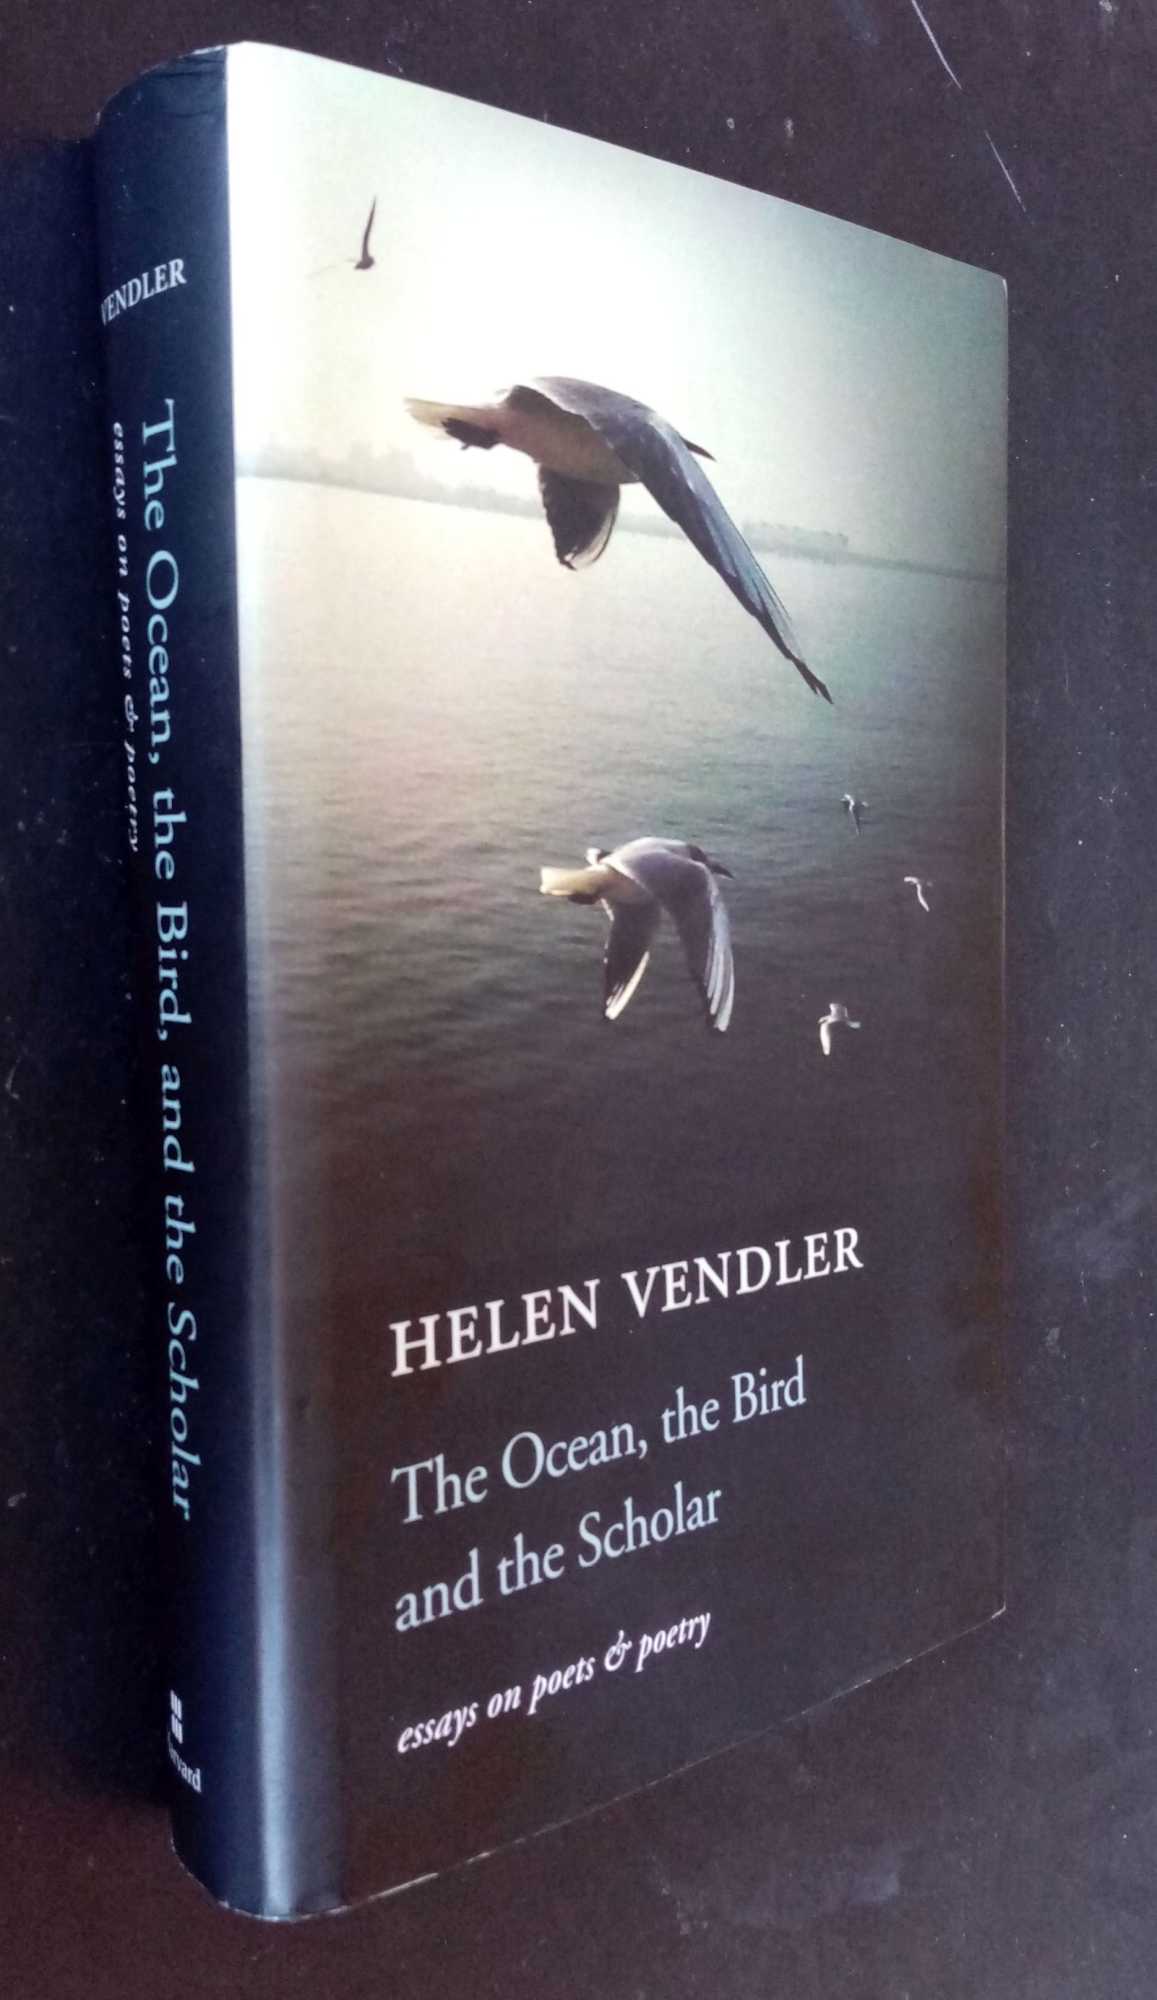 Helen Vendler - The Ocean, the Bird, and the Scholar: Essays on Poets and Poetry